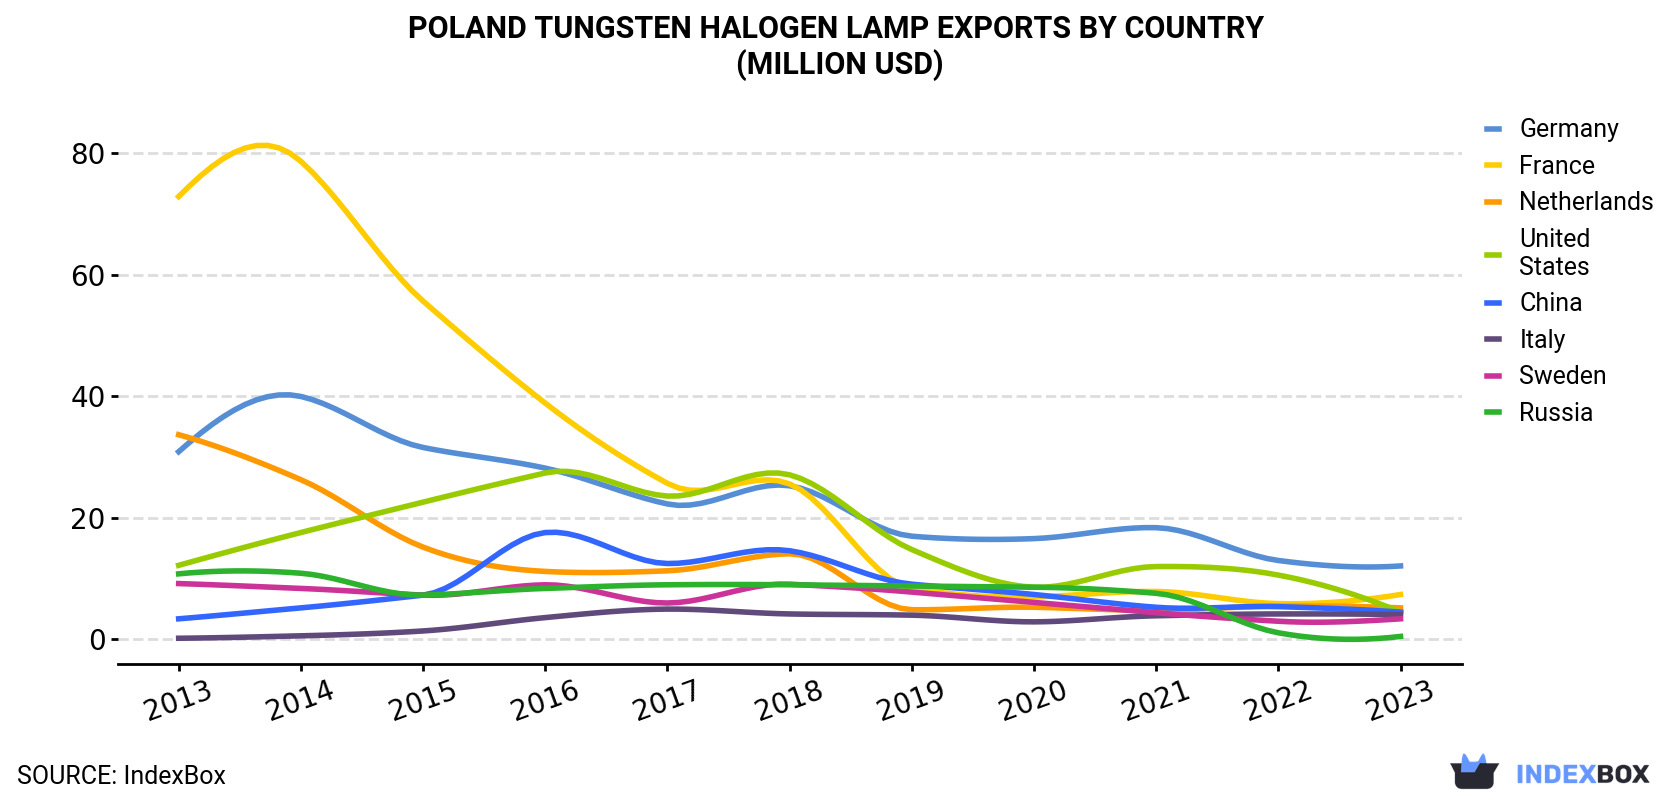 Poland Tungsten Halogen Lamp Exports By Country (Million USD)